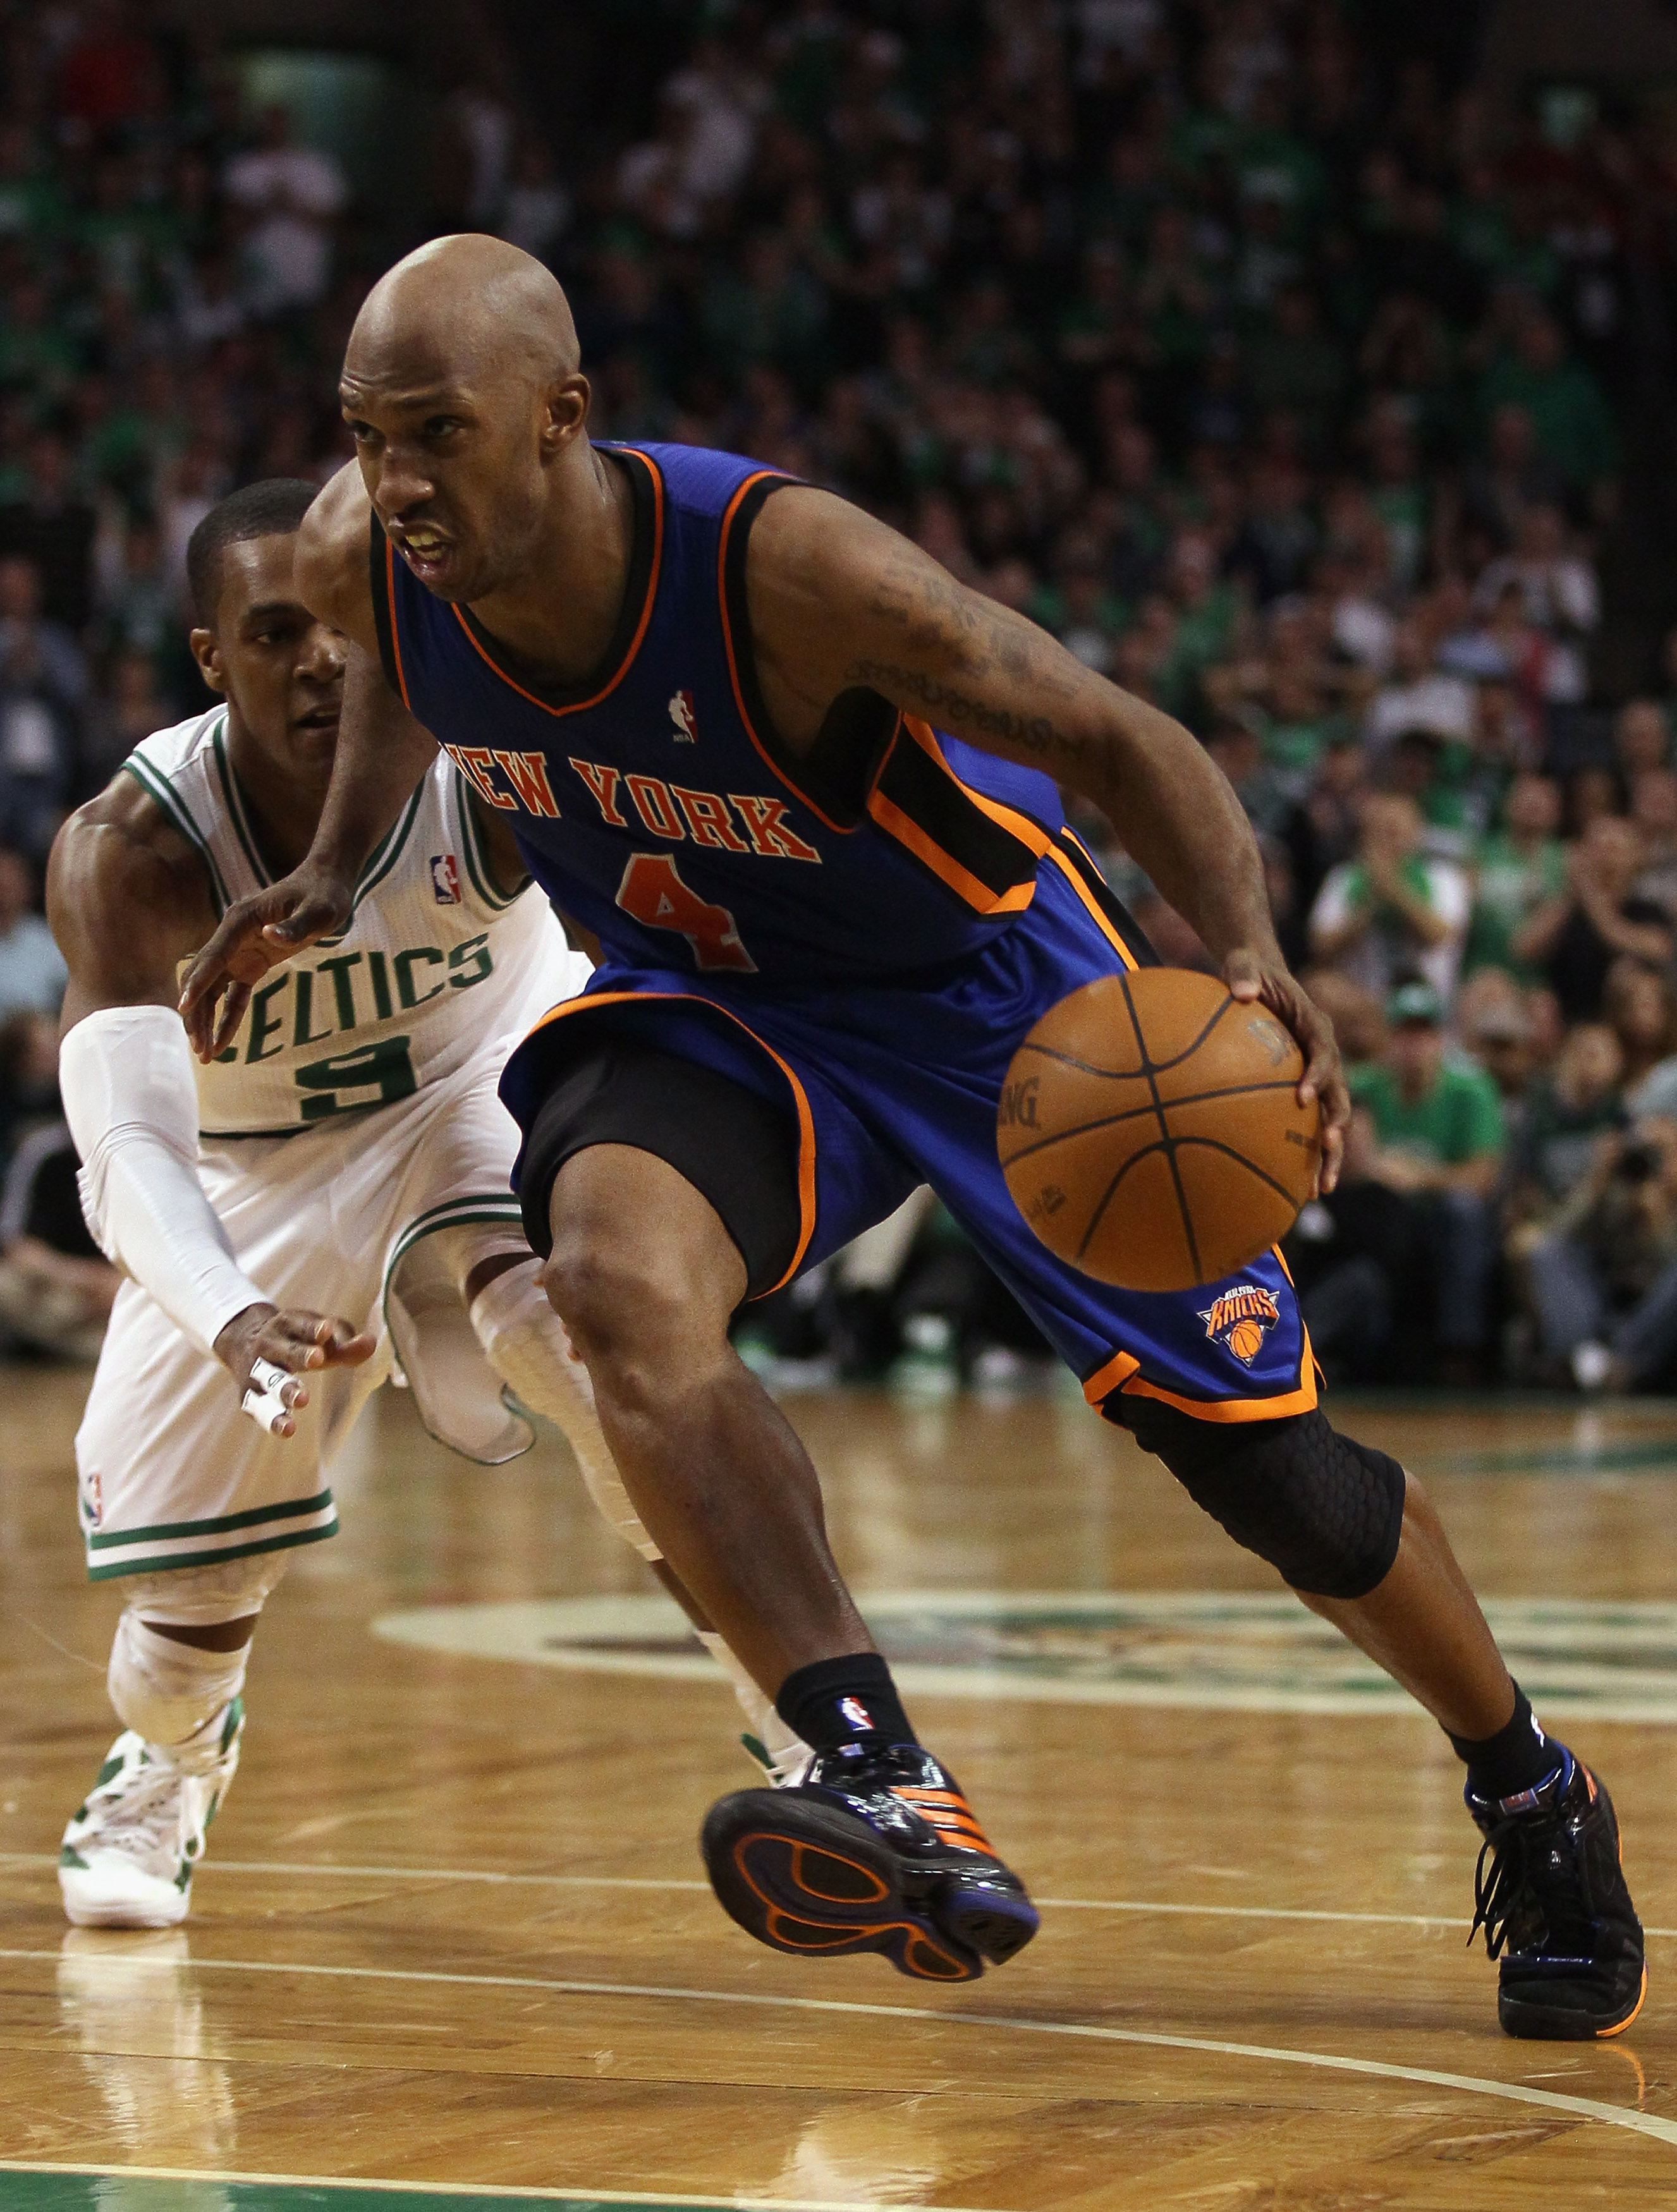 BOSTON, MA - APRIL 17:  Chauncey Billups #4 of the New York Knicks drives to the net as Rajon Rondo #9 of the Boston Celtics defends in Game One of the Eastern Conference Quarterfinals in the 2011 NBA Playoffs on April 17, 2011 at the TD Garden in Boston,